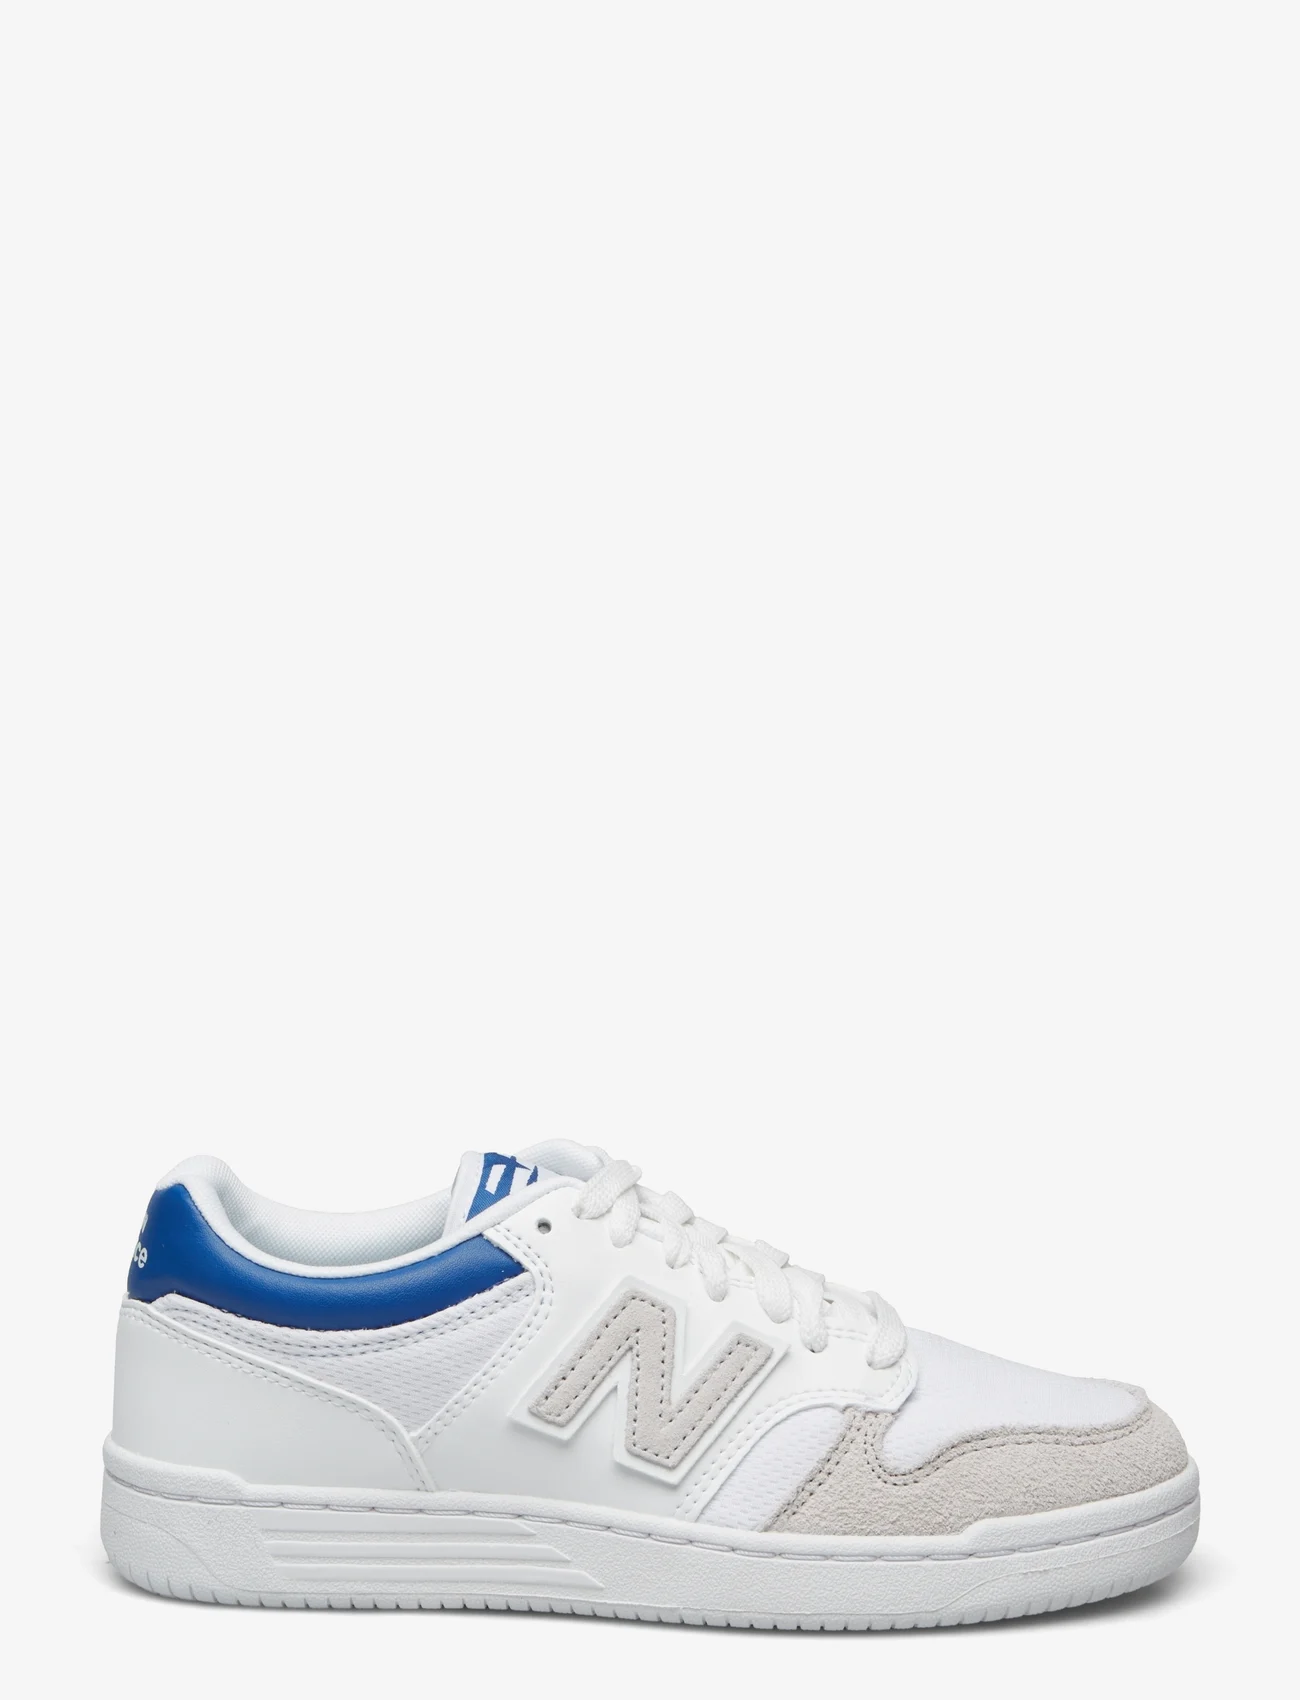 New Balance - New Balance BB480 - low top sneakers - white - 1